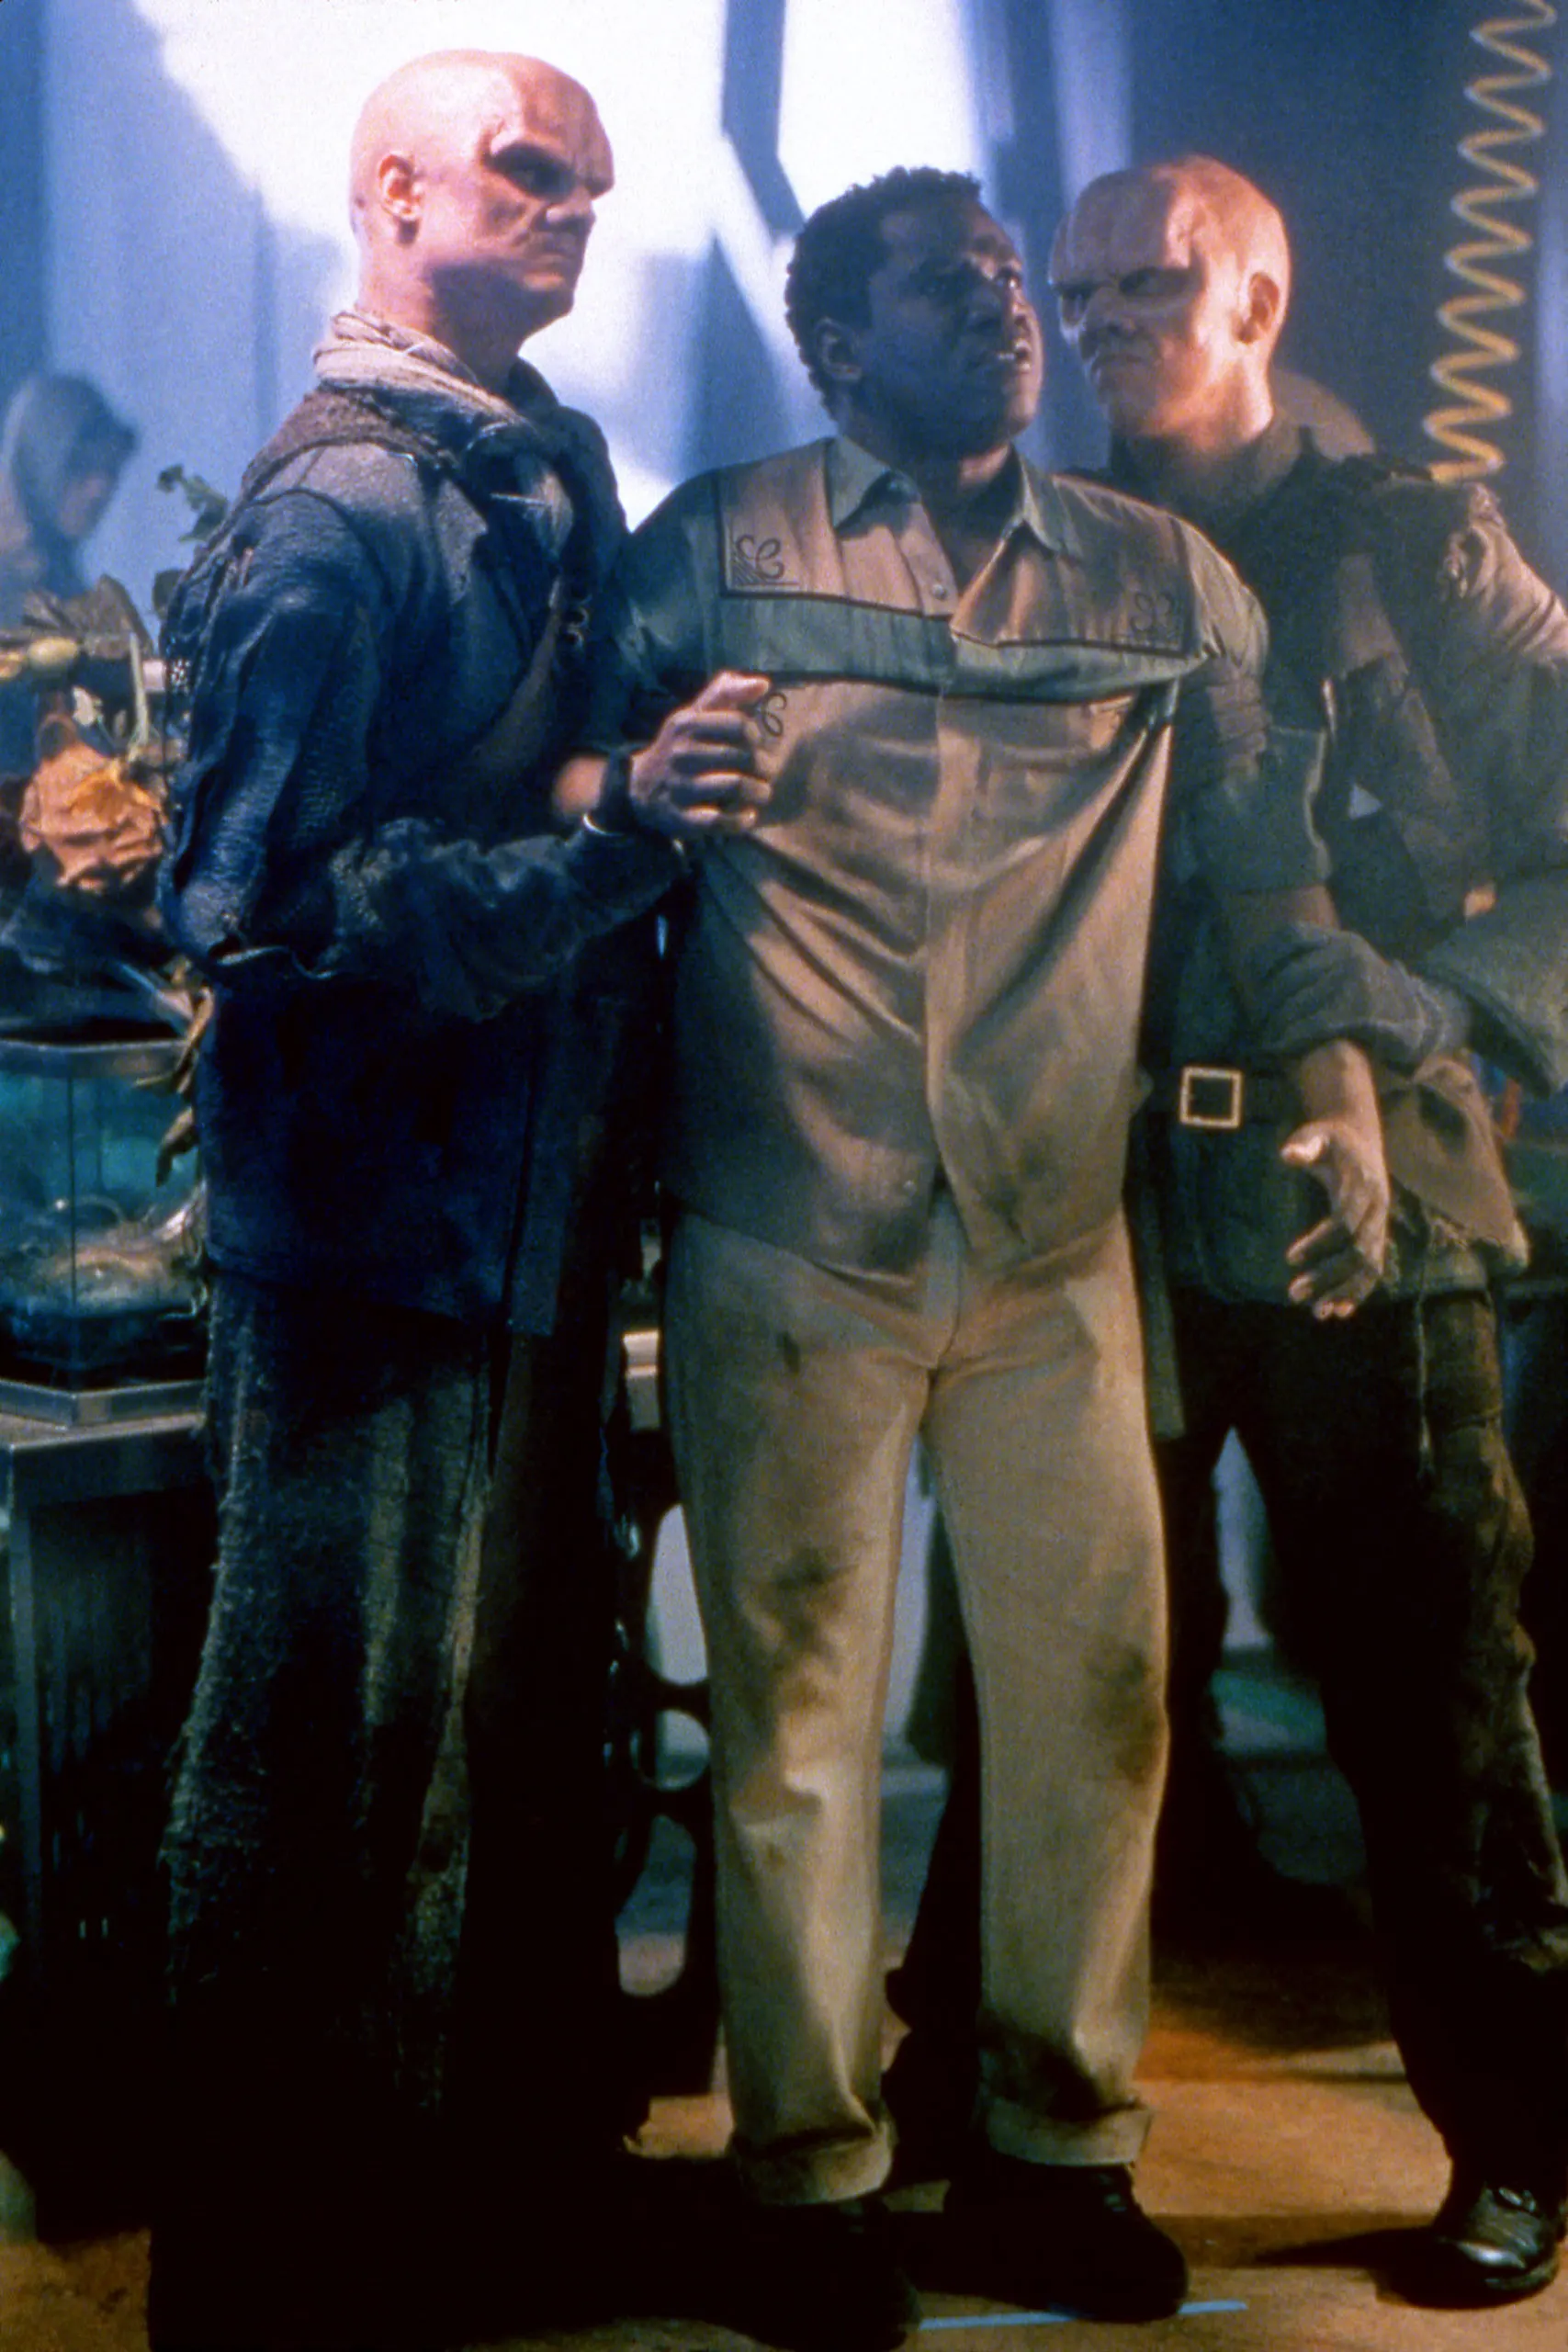 Rembrandt Brown detained by two Kromagg soldiers in the Sliders episode Slidecage